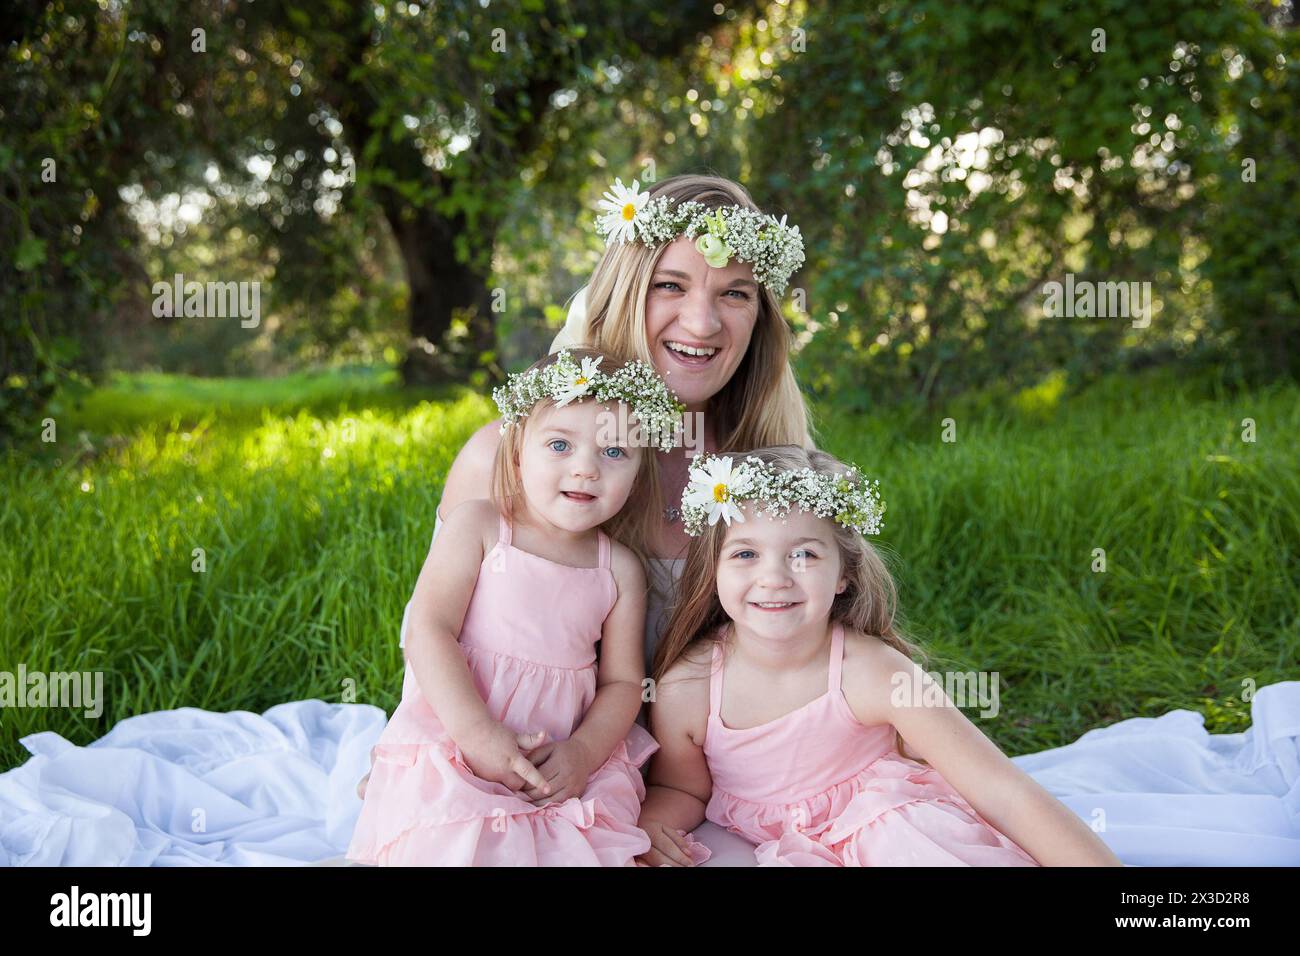 Joyful family moment with flower crowns in sunlit meadow Stock Photo